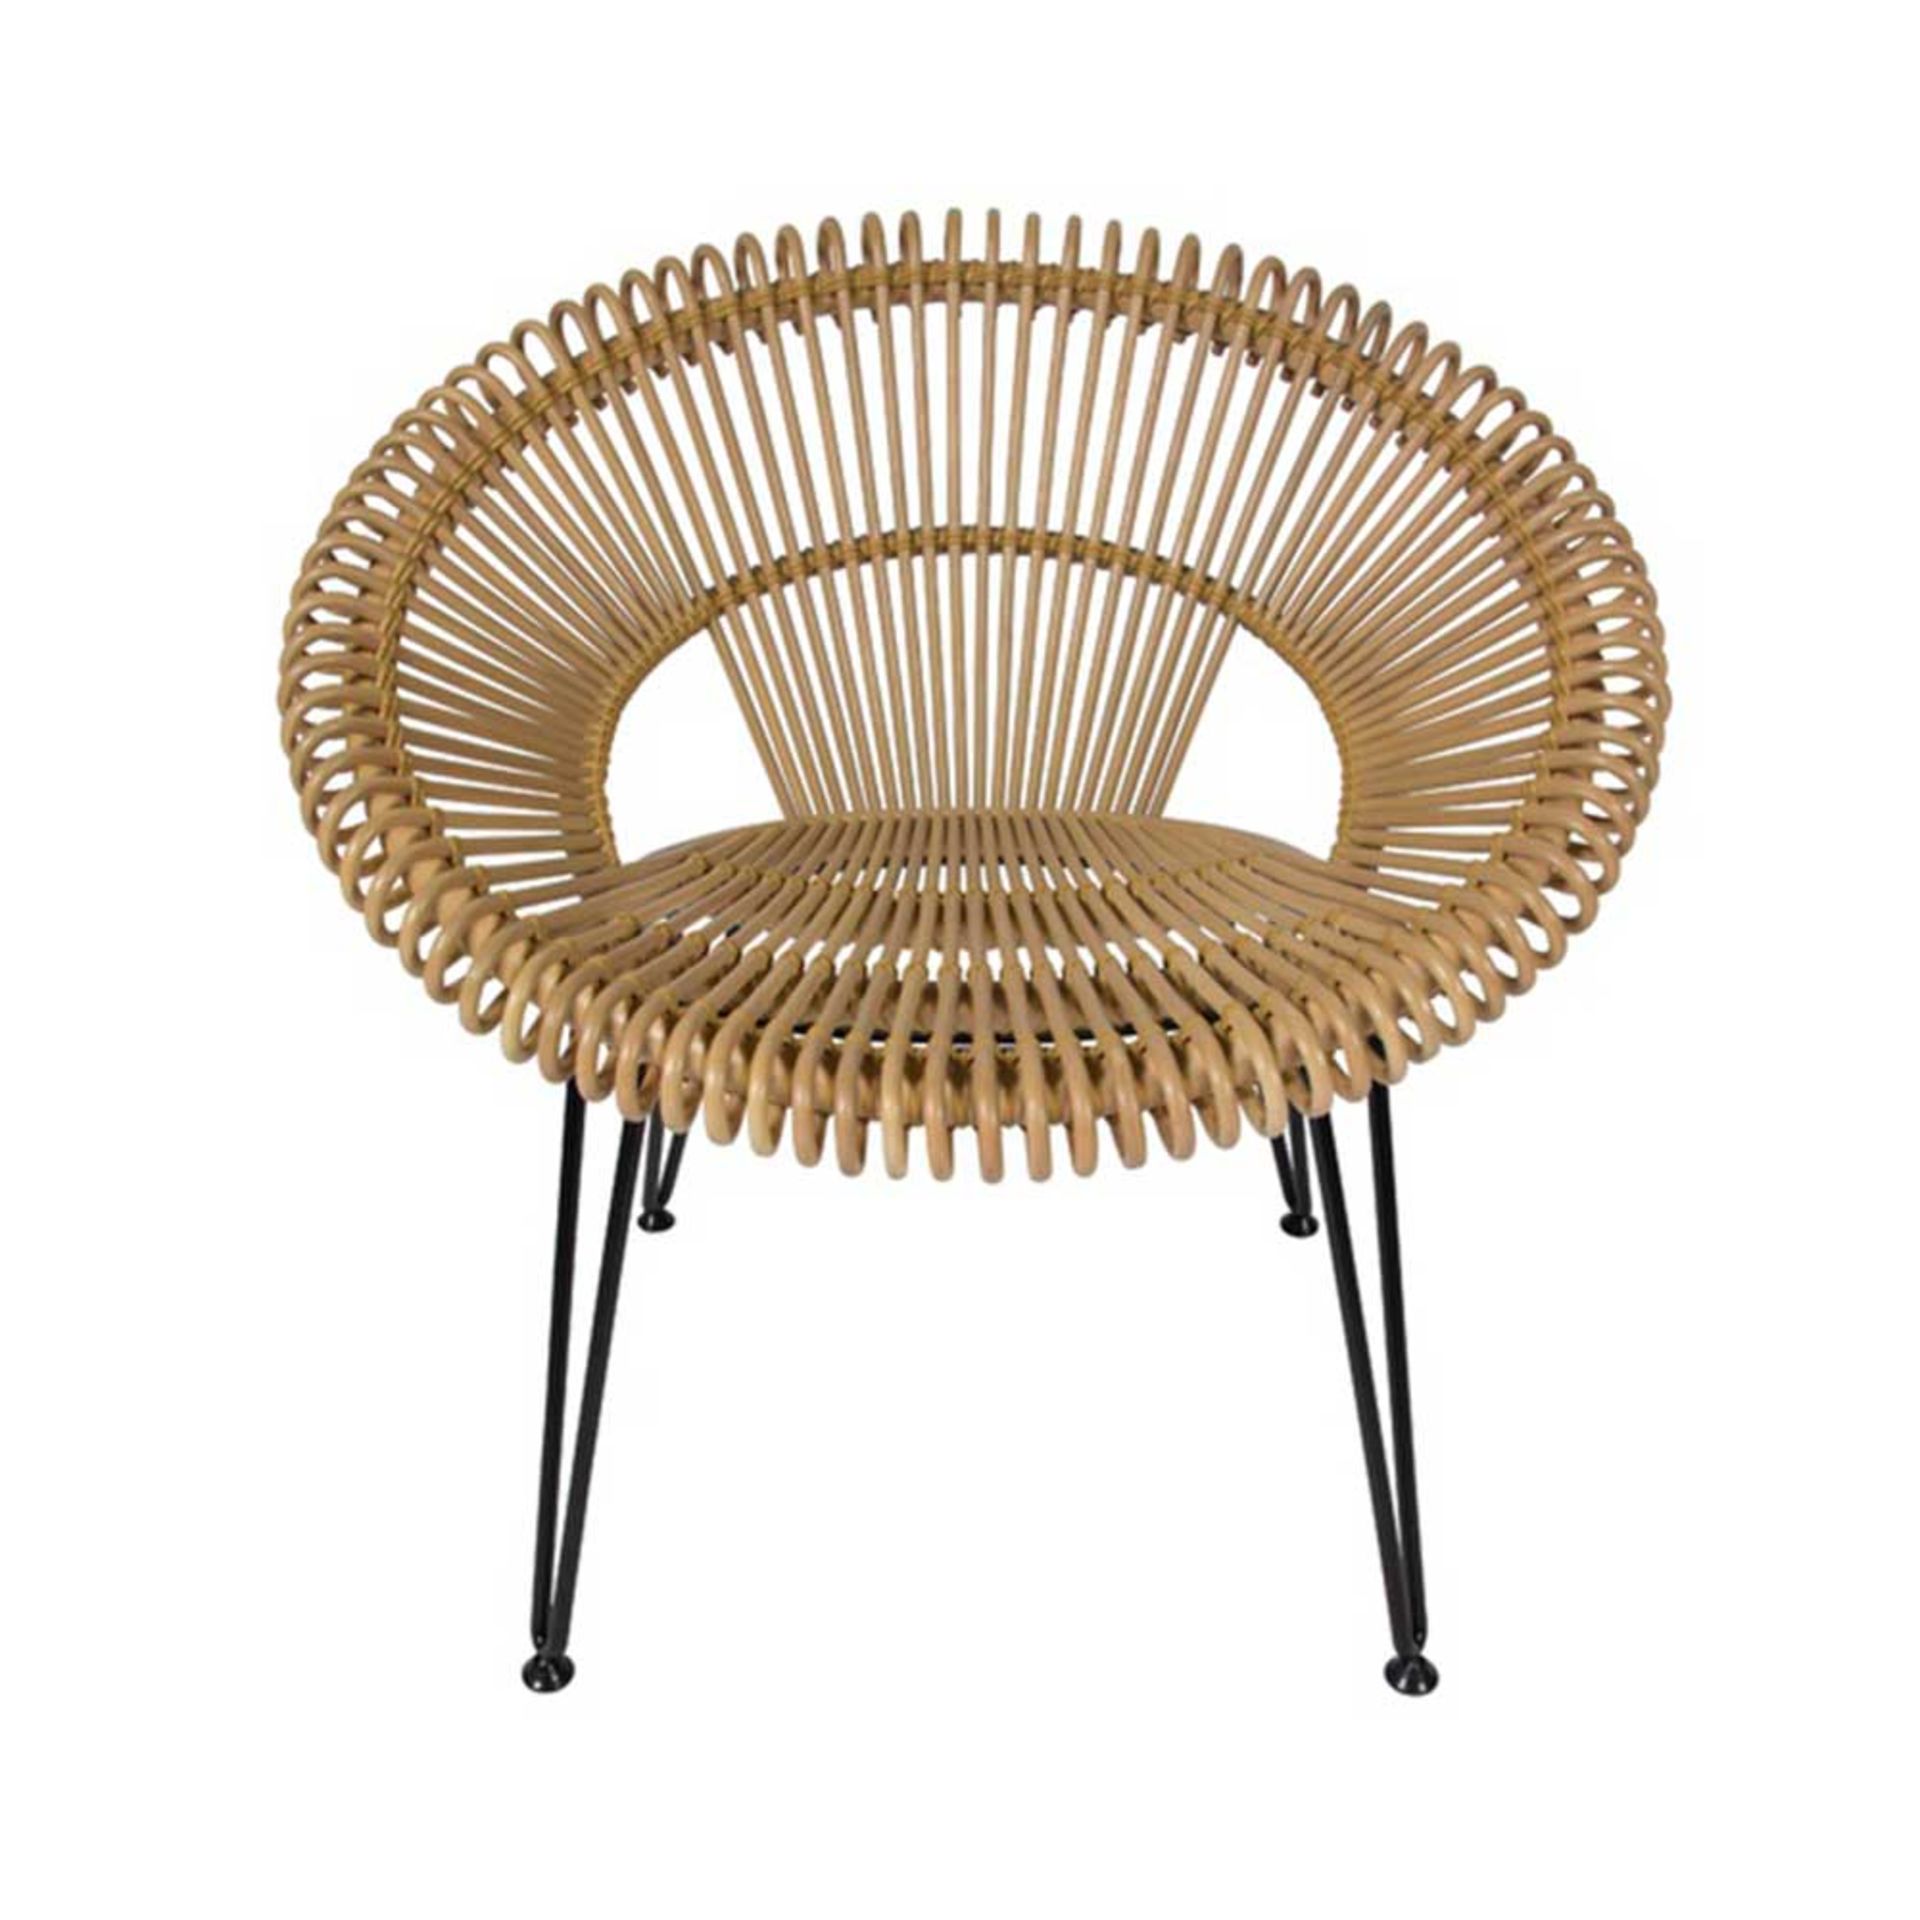 1 x Cruz Lazy Chair By Vincent Shepherd - Natural Rattan - For Contemporary Interiors - RRP £375! - Image 3 of 4